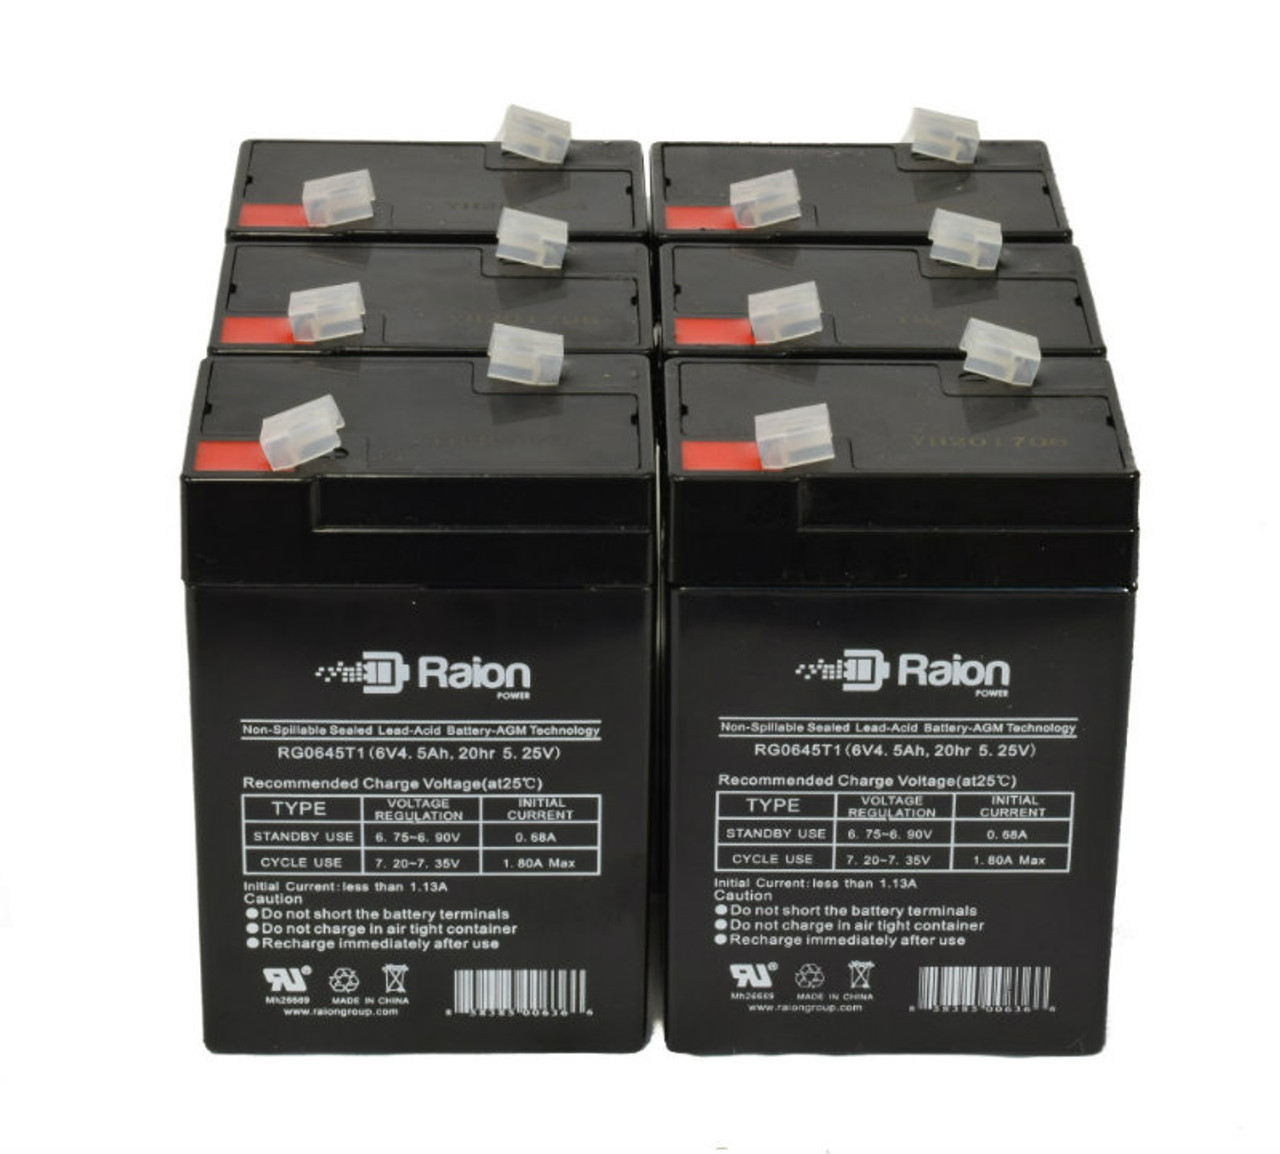 Raion Power 6 Volt 4.5Ah RG0645T1 Replacement Battery for Starlight SA6-4.5 - 6 Pack